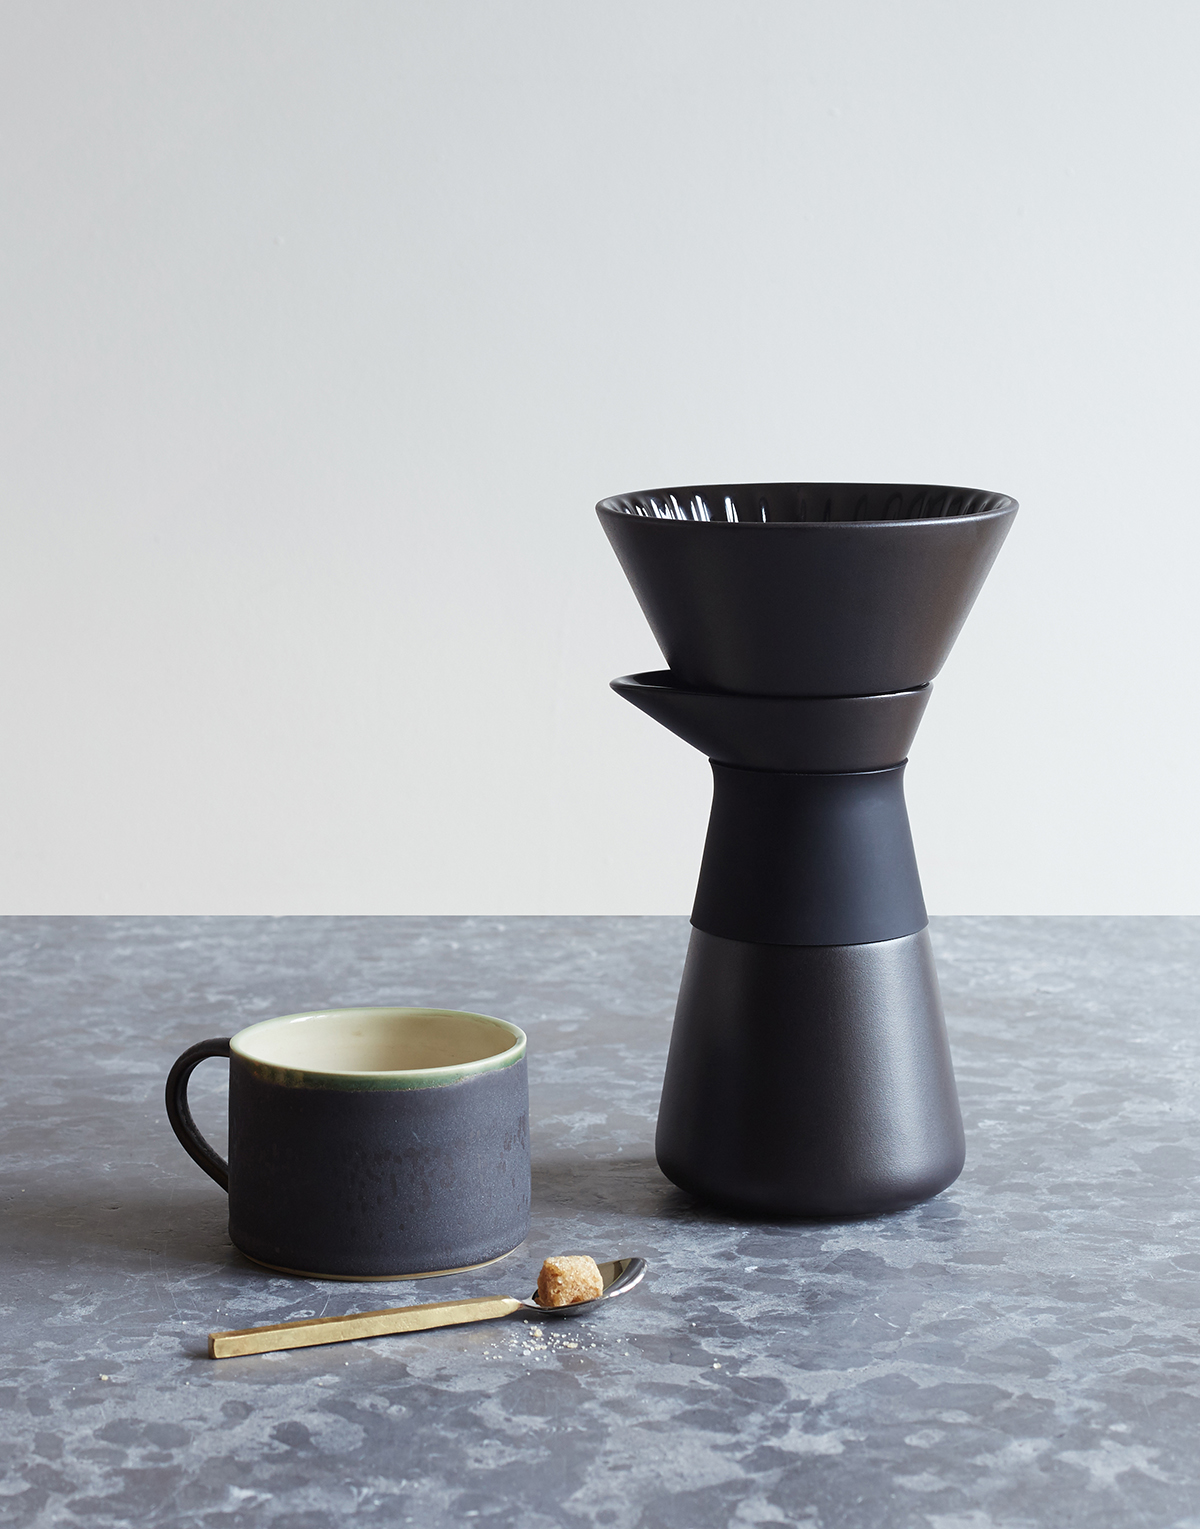 Theo 'Slow Brewer' Coffee Brewer, Oggetto, £52.95Danish design brand Stelton's award winning Theo range is a perfect gift for lovers of slow brew filter coffee.